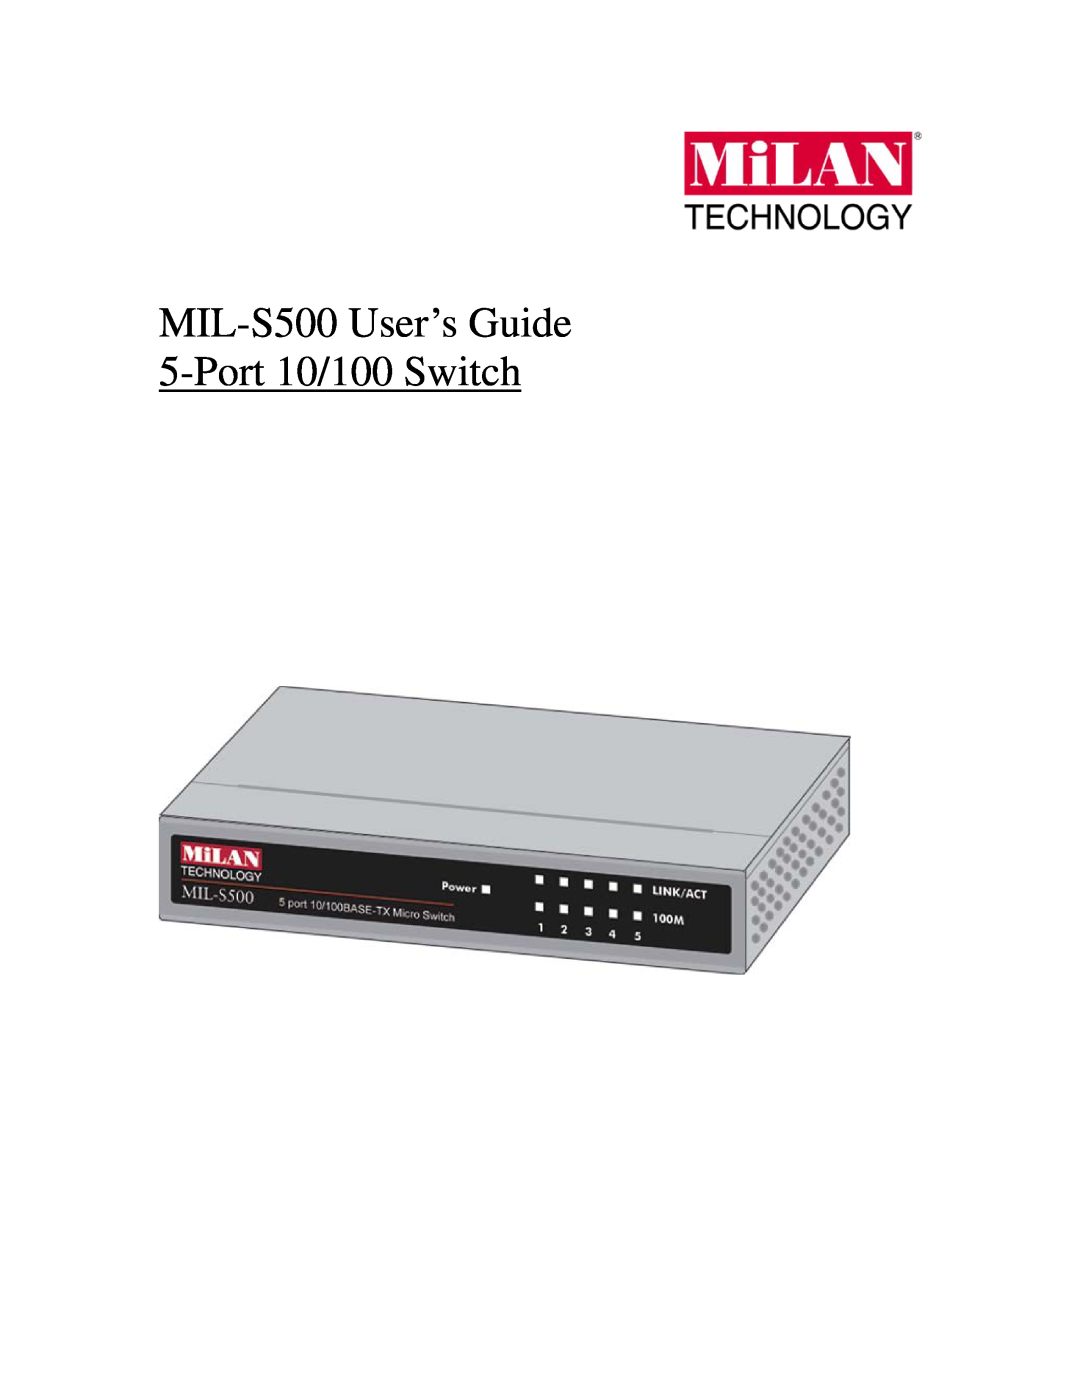 Milan Technology manual MIL-S500 User’s Guide 5-Port 10/100 Switch 